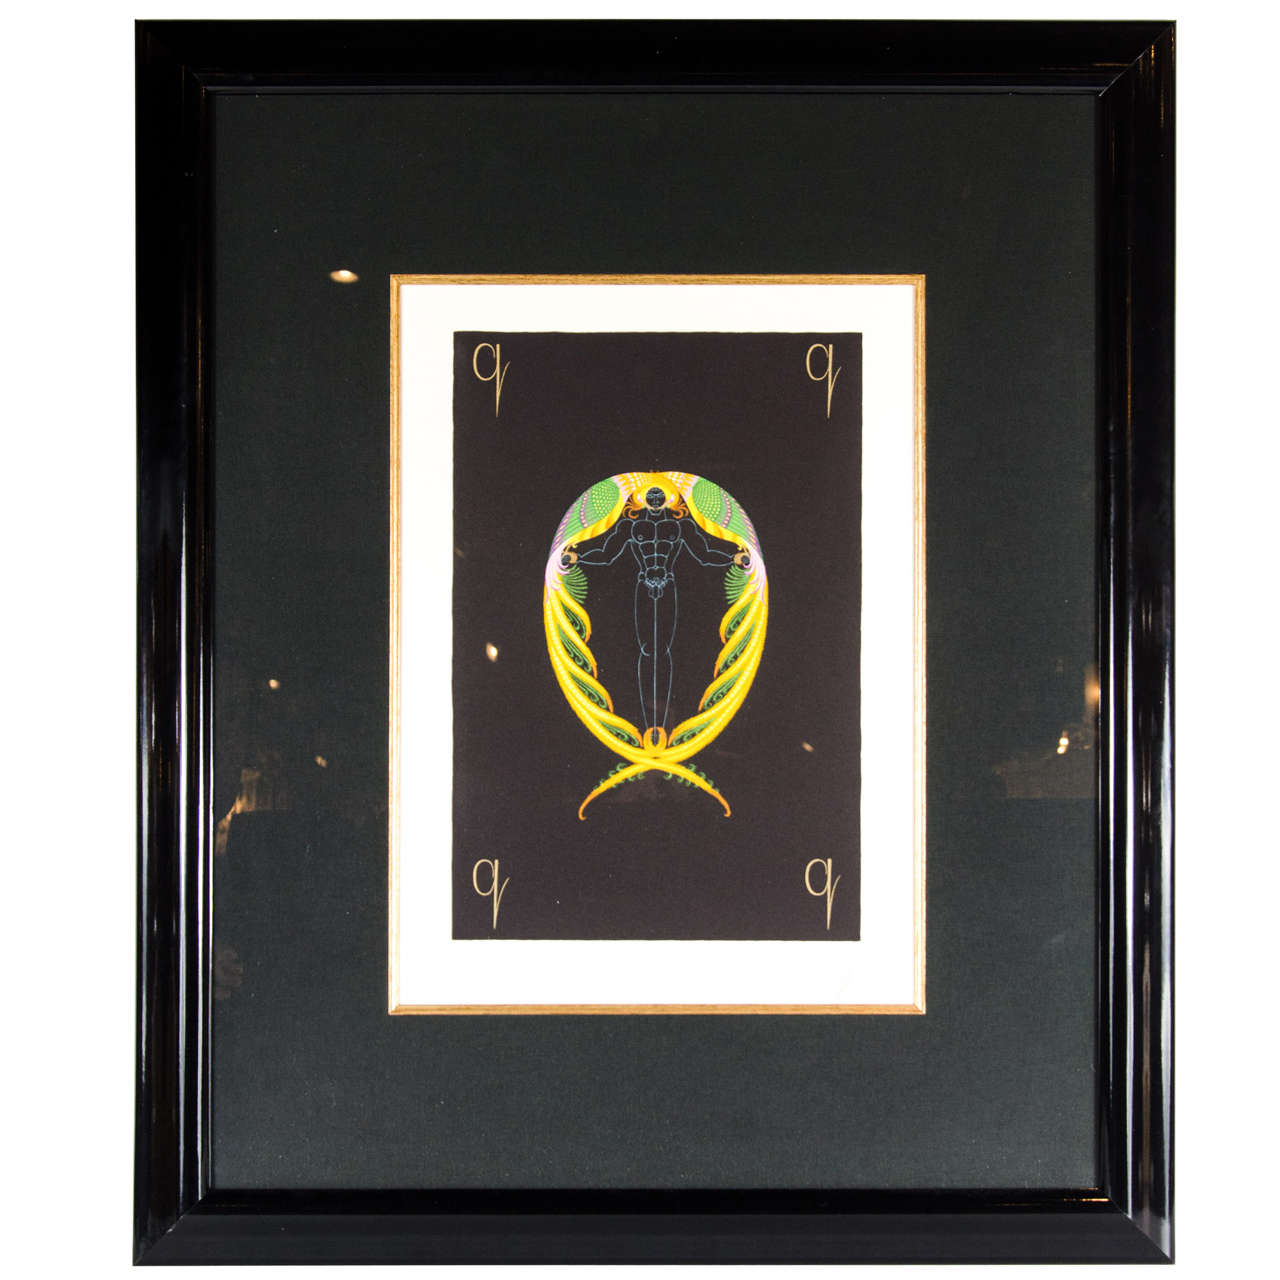 Ultra Chic Limited Edition Erte' Serigraph"Q"